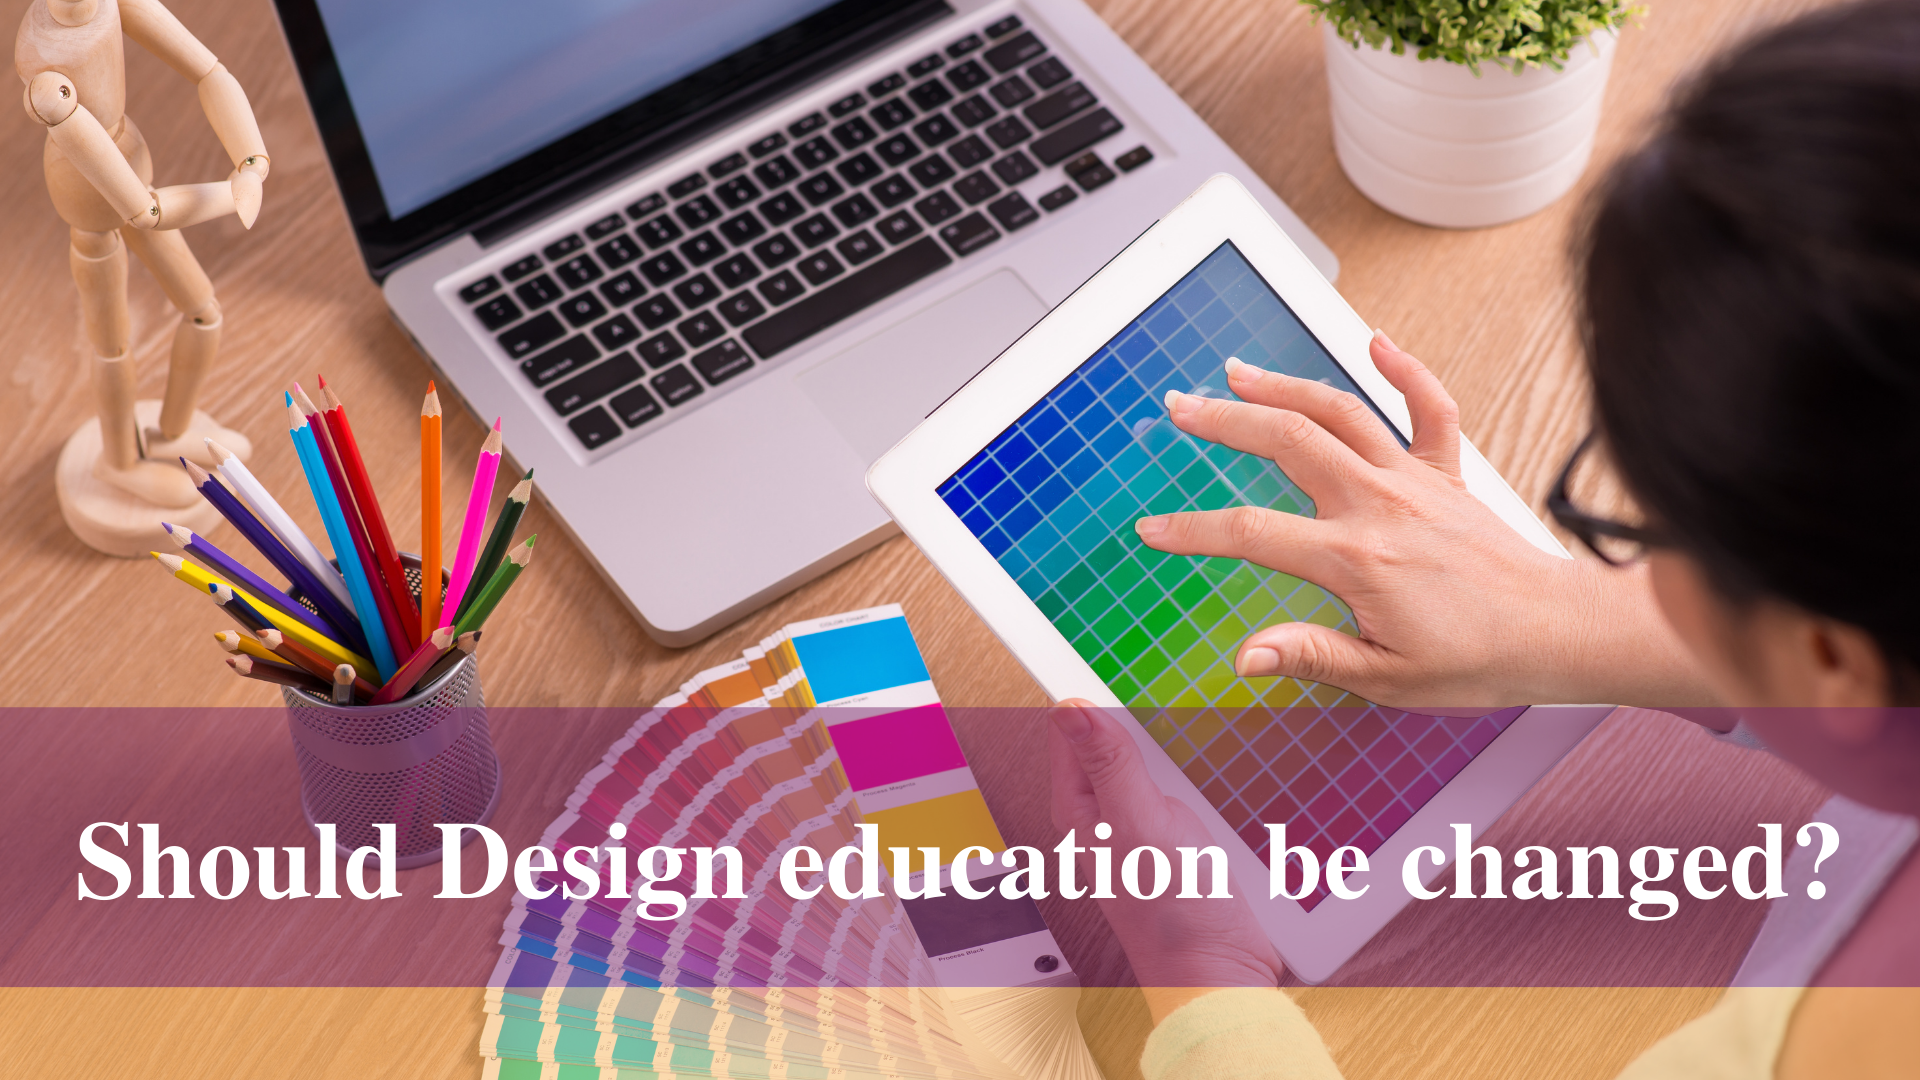 Should Design education be changed